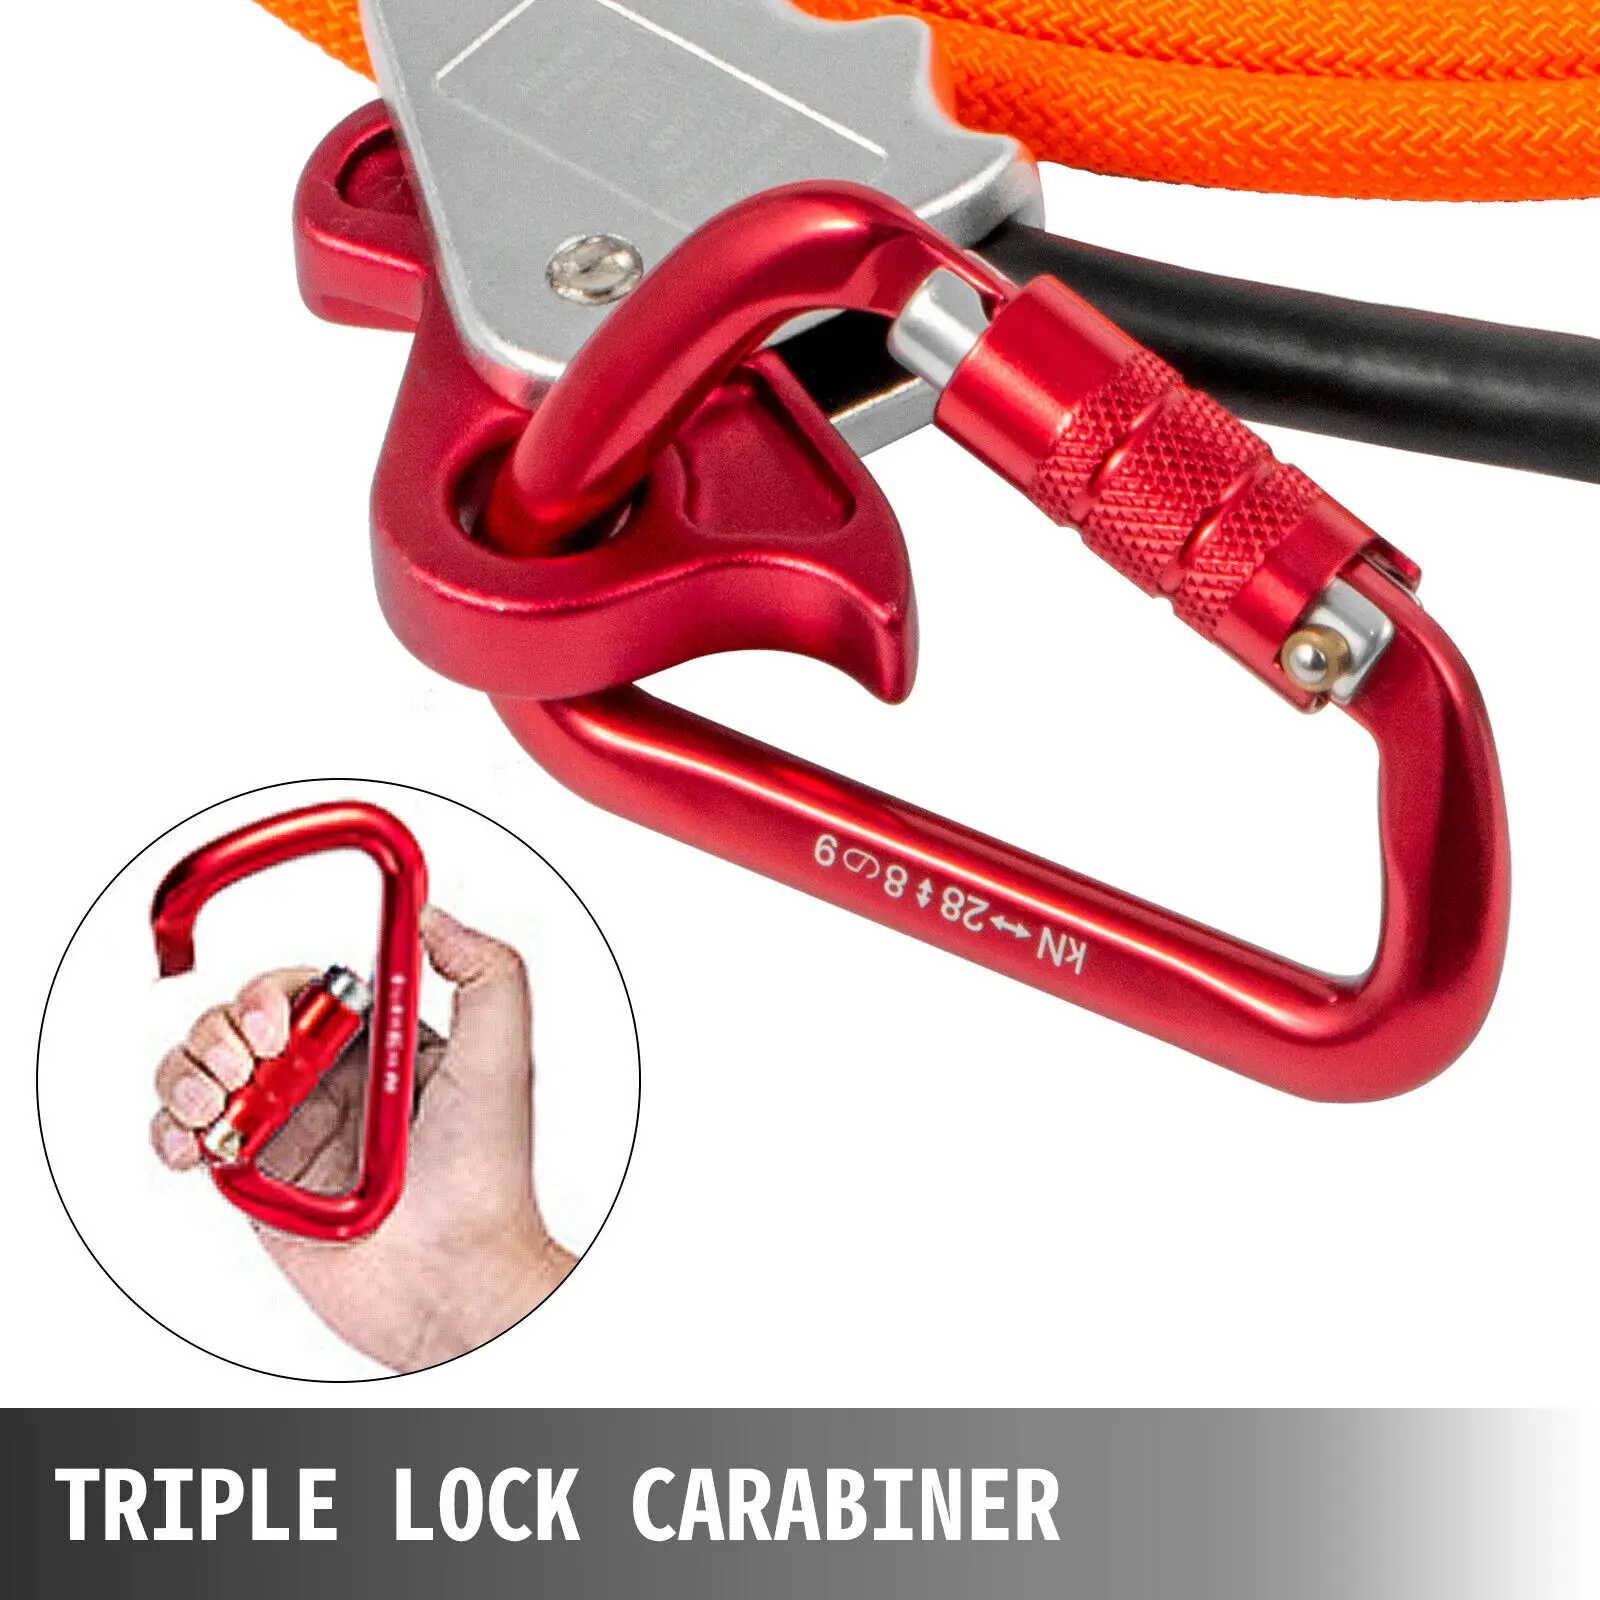 Safety Steel Wire Core Lanyard Kit with Hook Carabineer Climbers Tree Climbing 